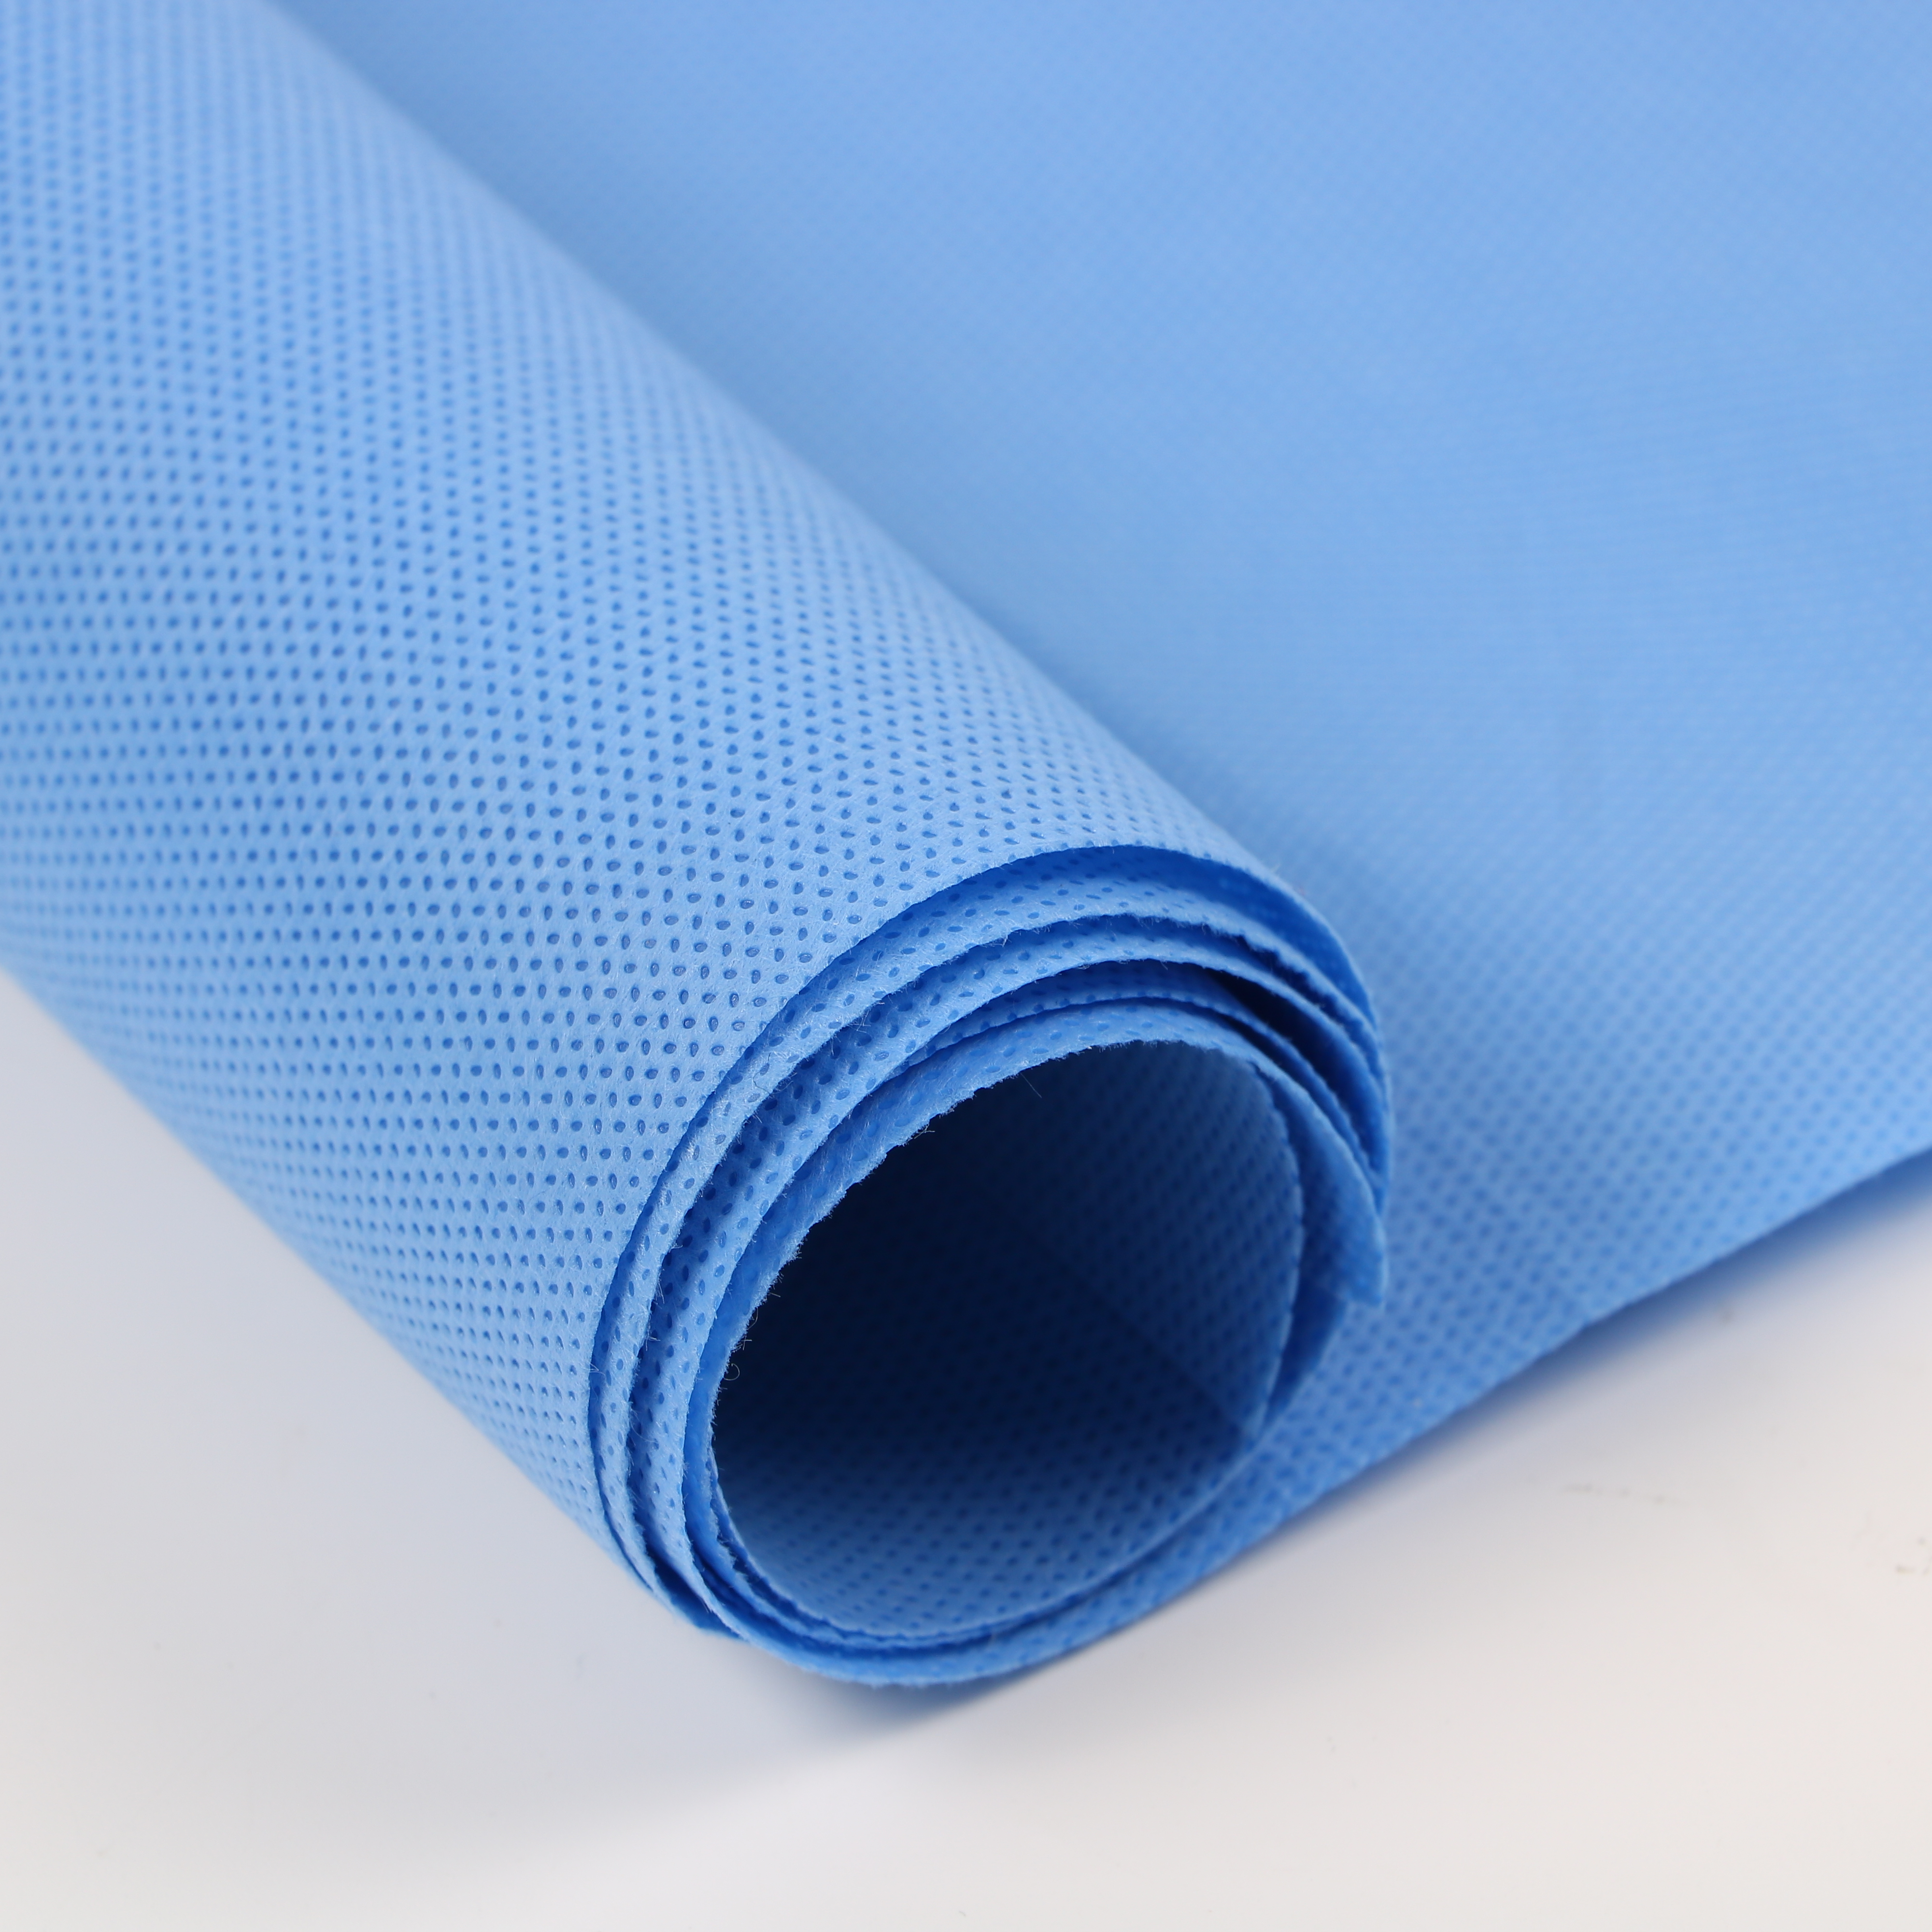 What are the product categories of medical sterilization non-woven fabrics?